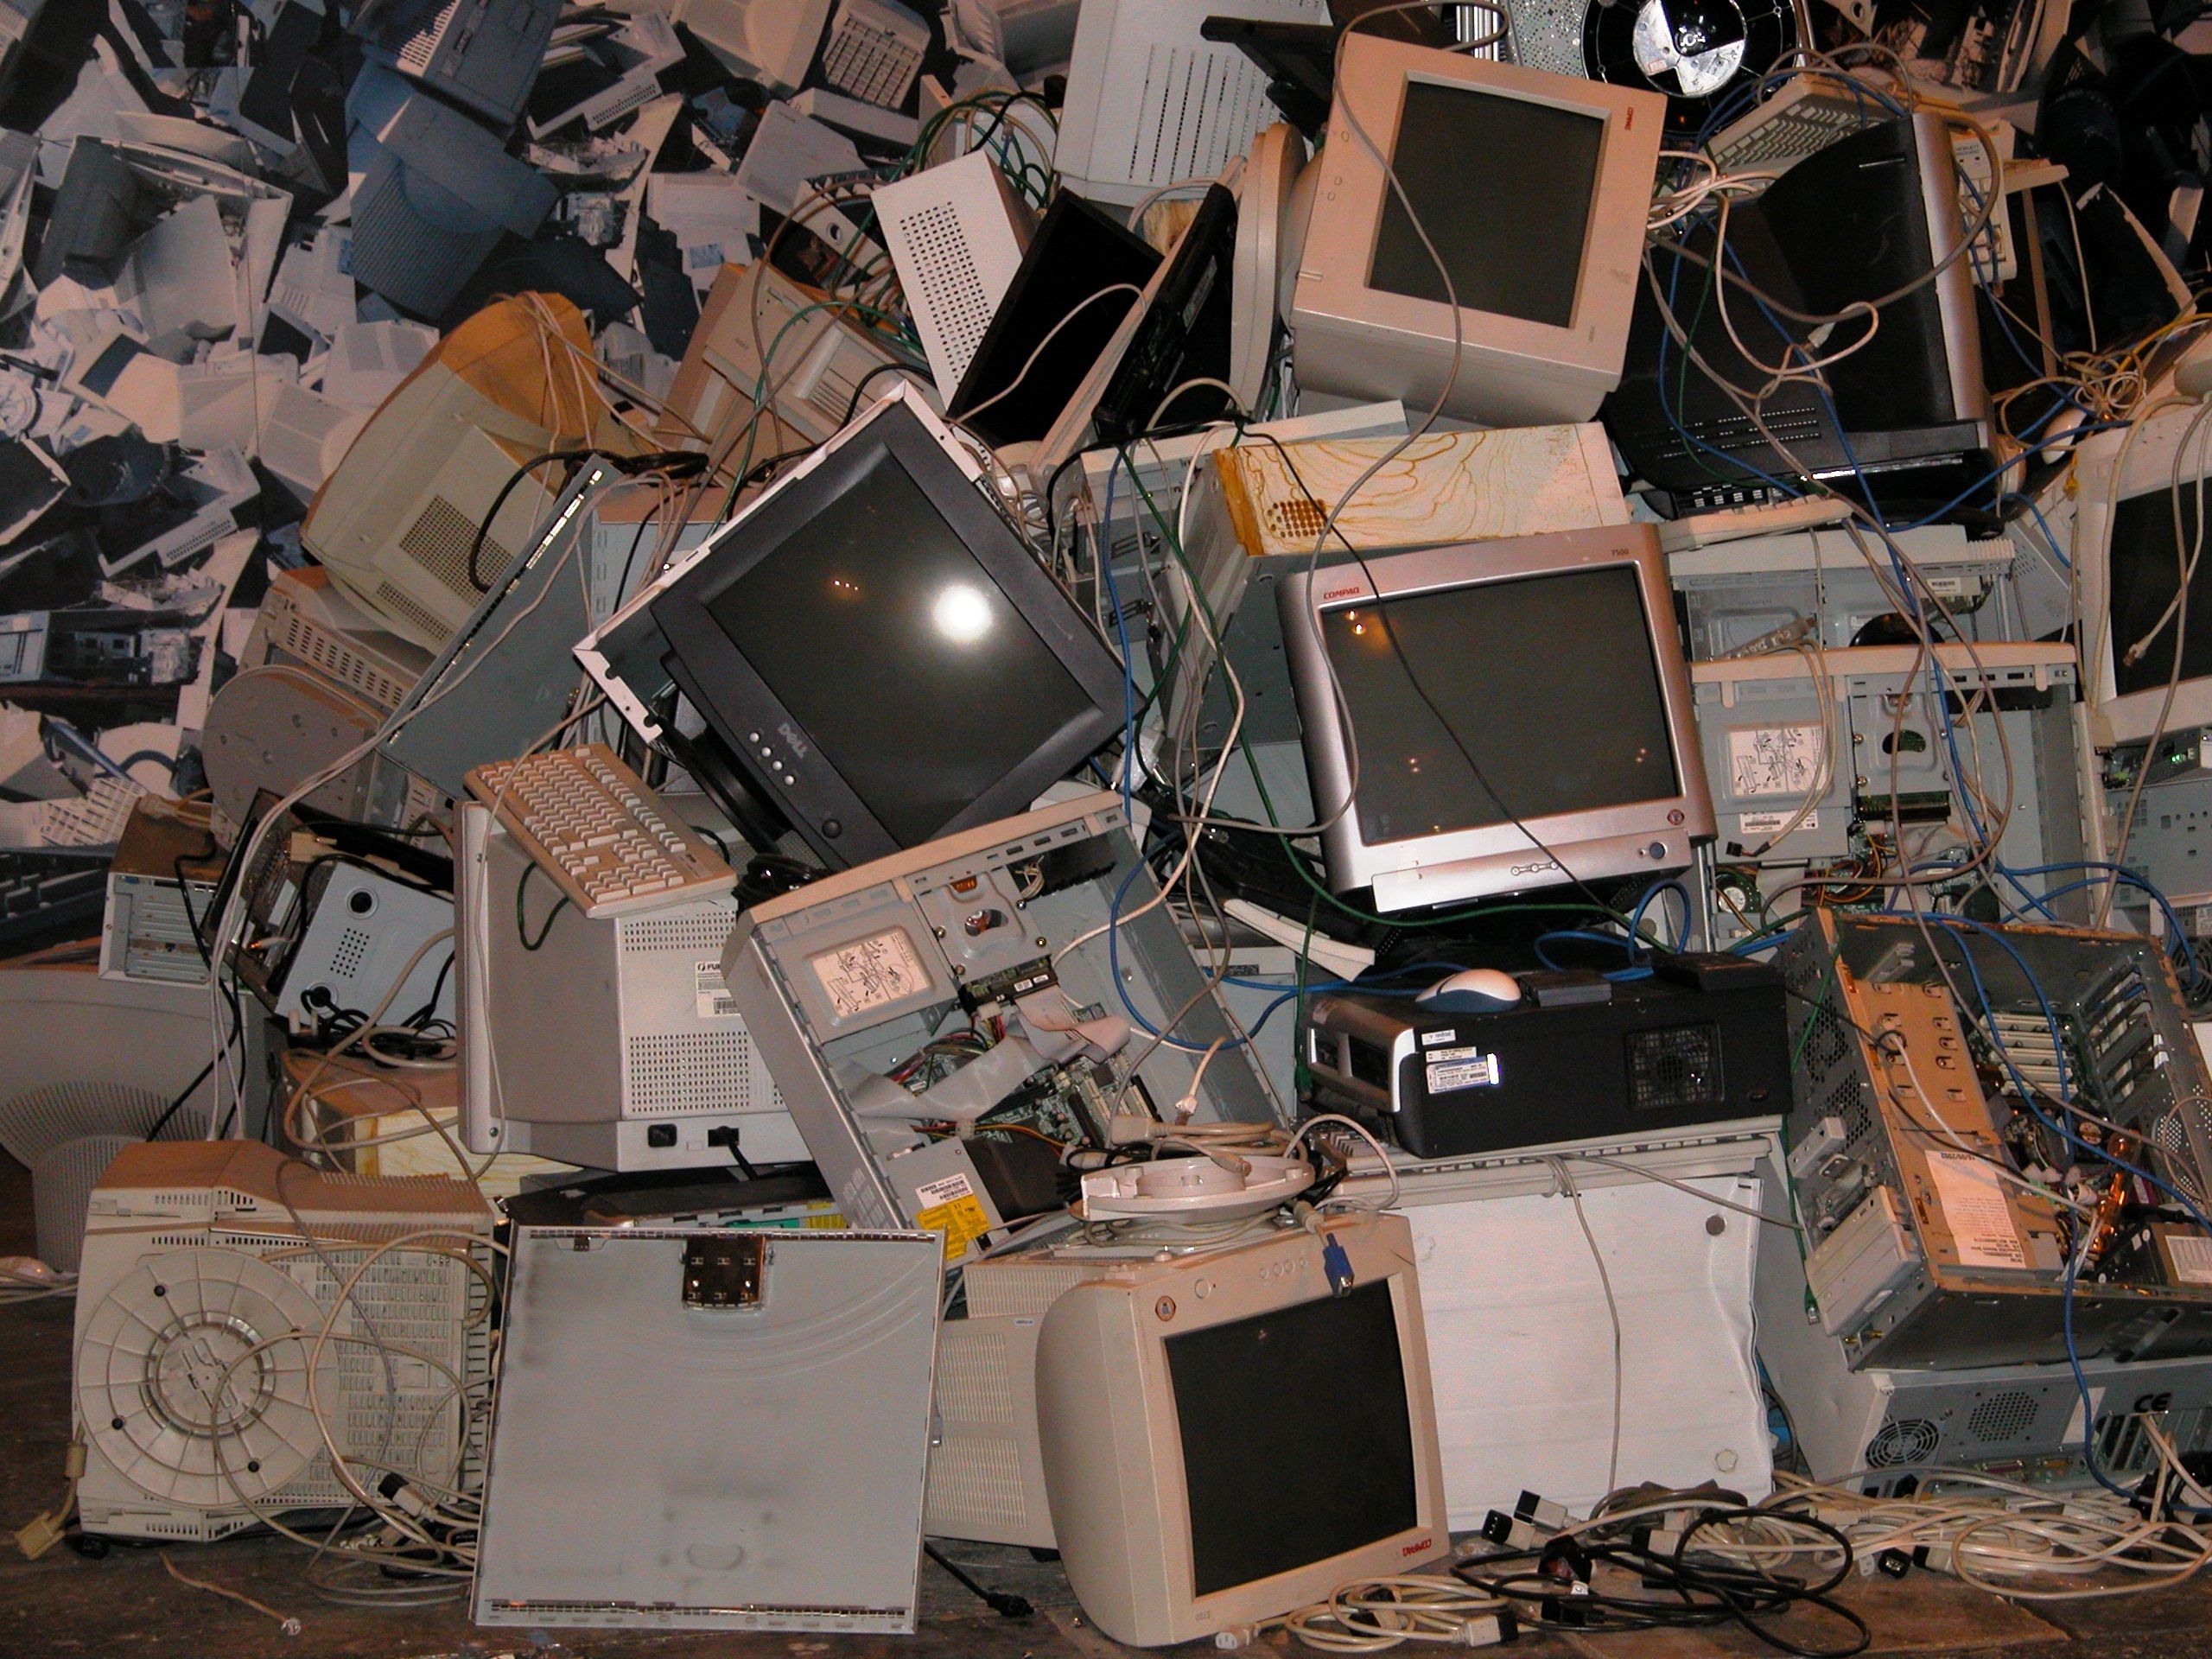 pile of discarded electronics - IT equipment during transition